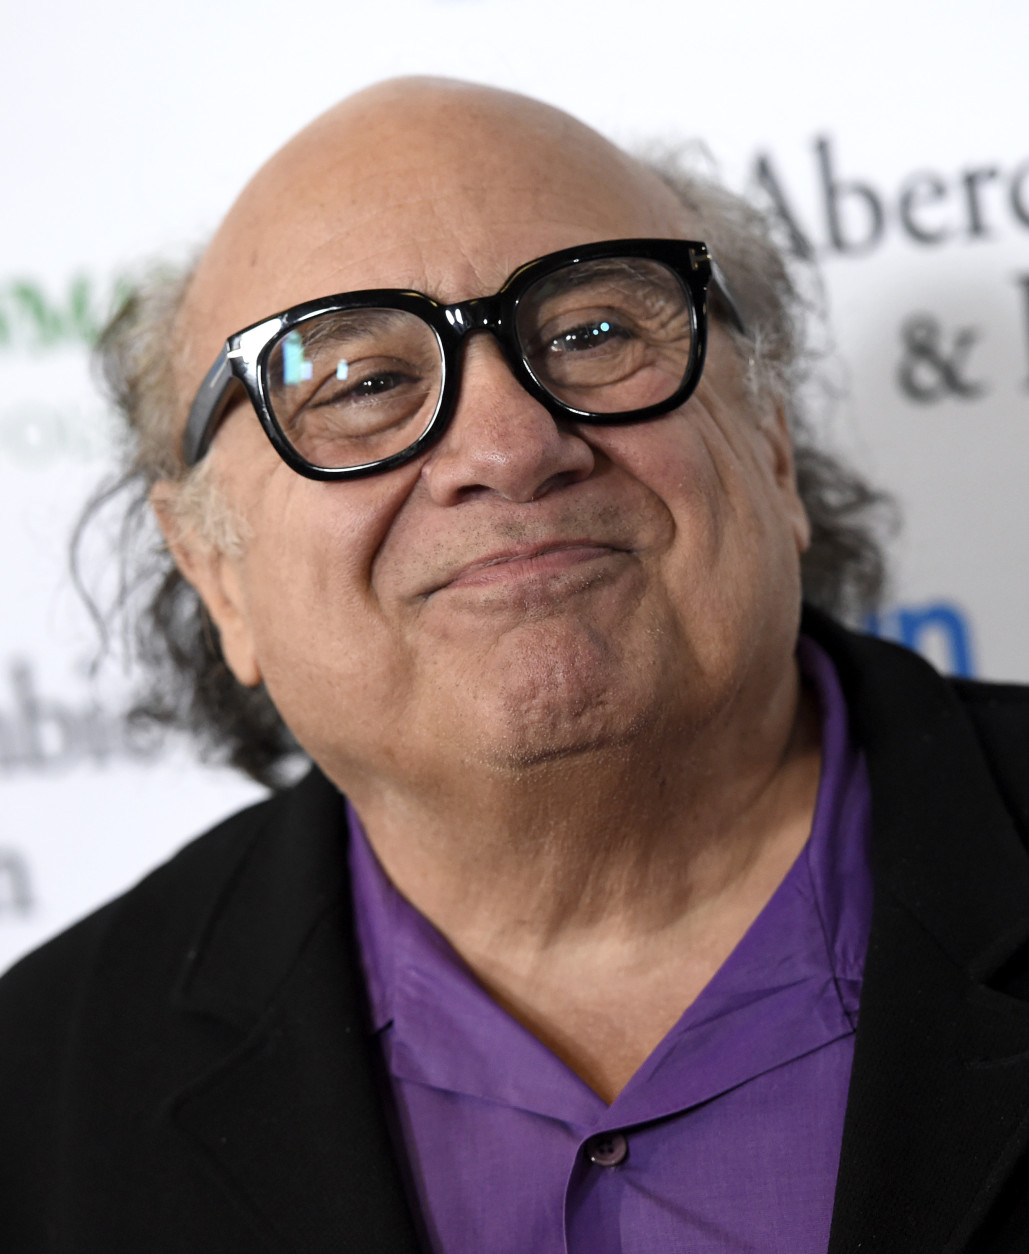 Danny DeVito arrives at SeriousFun Children's Network event at the Dolby Theatre on Thursday, May 14, 2015, in Los Angeles. (Photo by Chris Pizzello/Invision/AP)